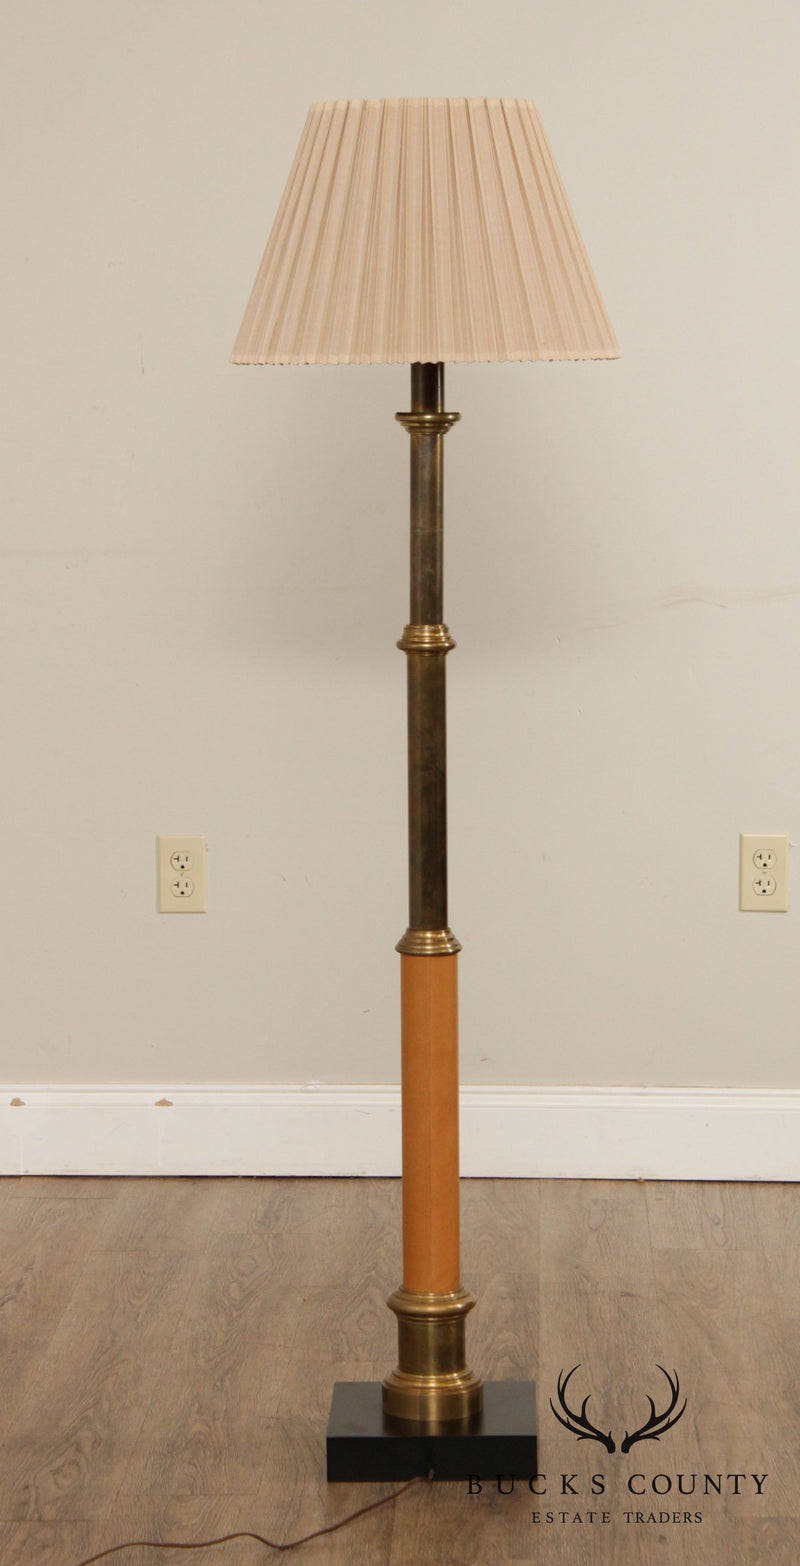 Chapman Vintage Leather Wrapped Brass Floor Lamp